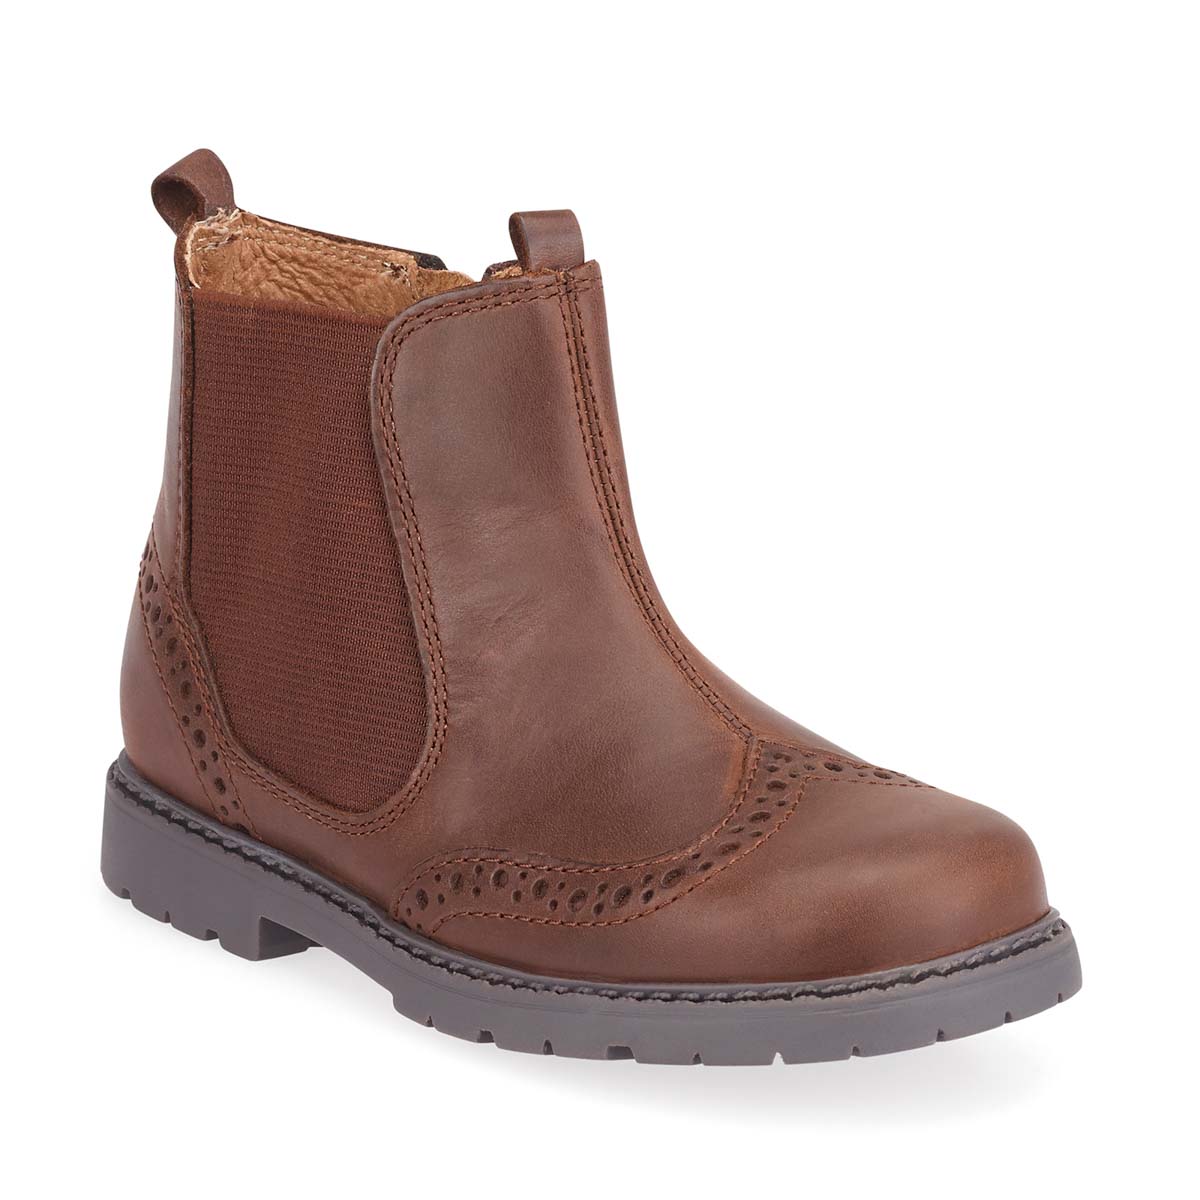 Start Rite Chelsea Brown leather Kids Girls Boots 1727-06F in a Plain Leather in Size 3